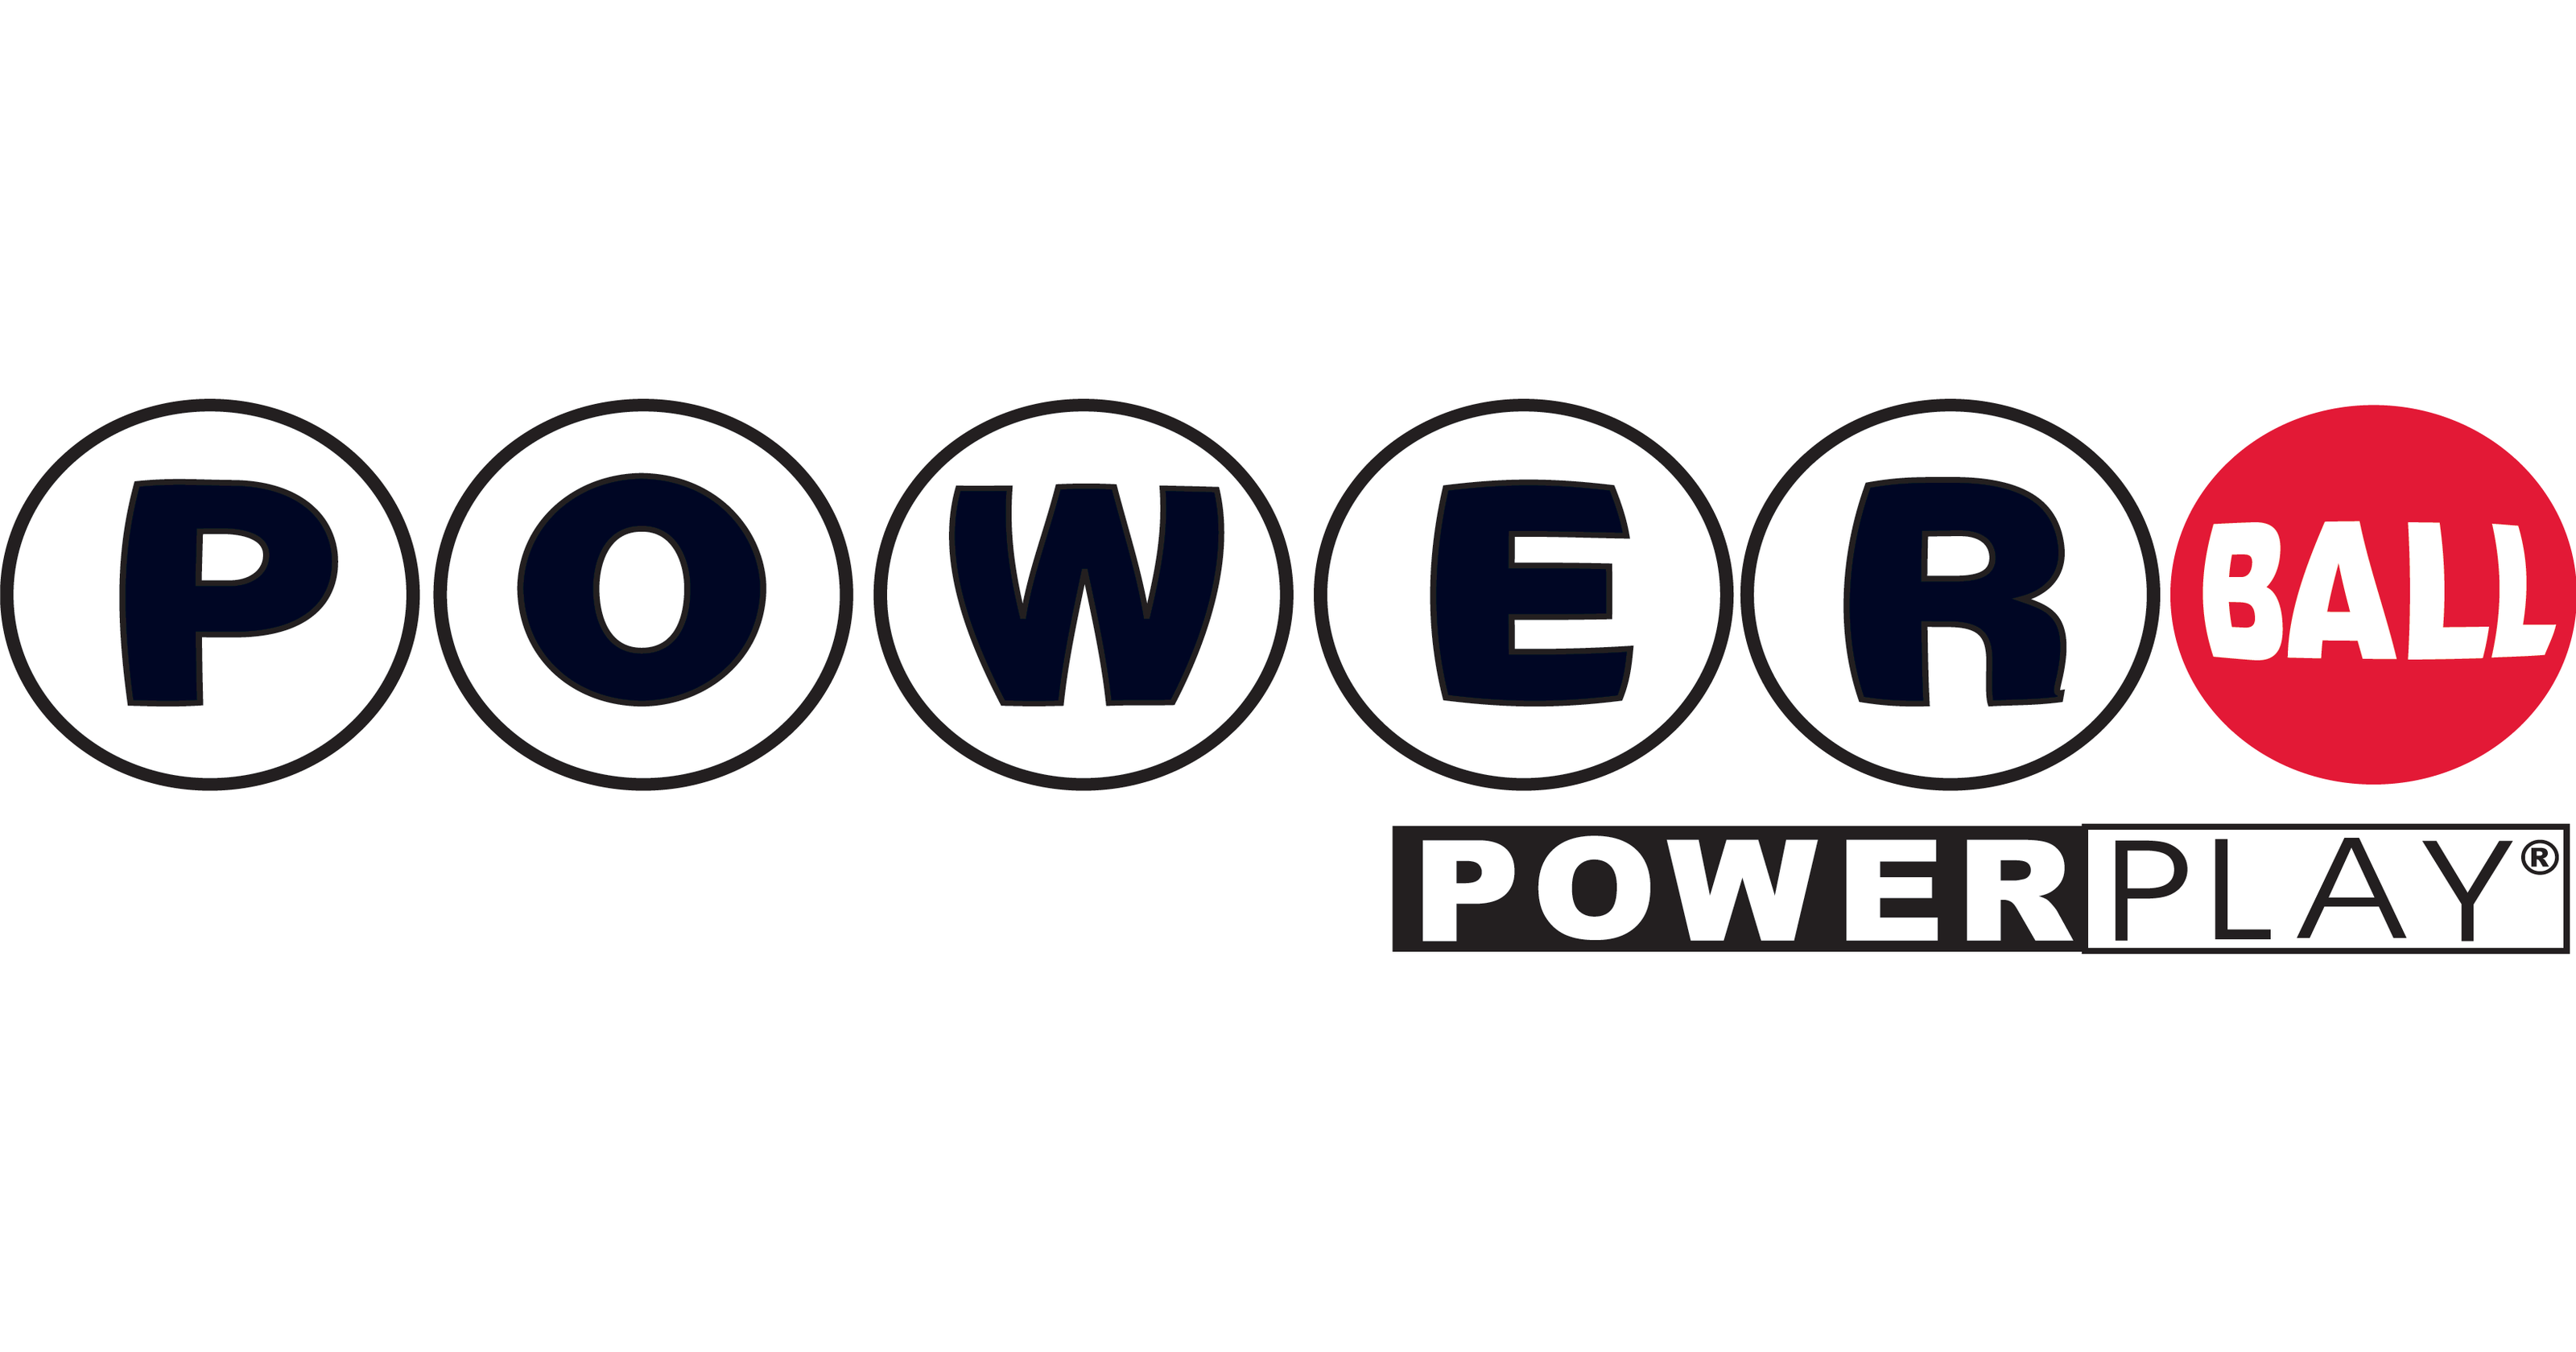 Powerball drawing time, odds: Jackpot up to $470 million Saturday